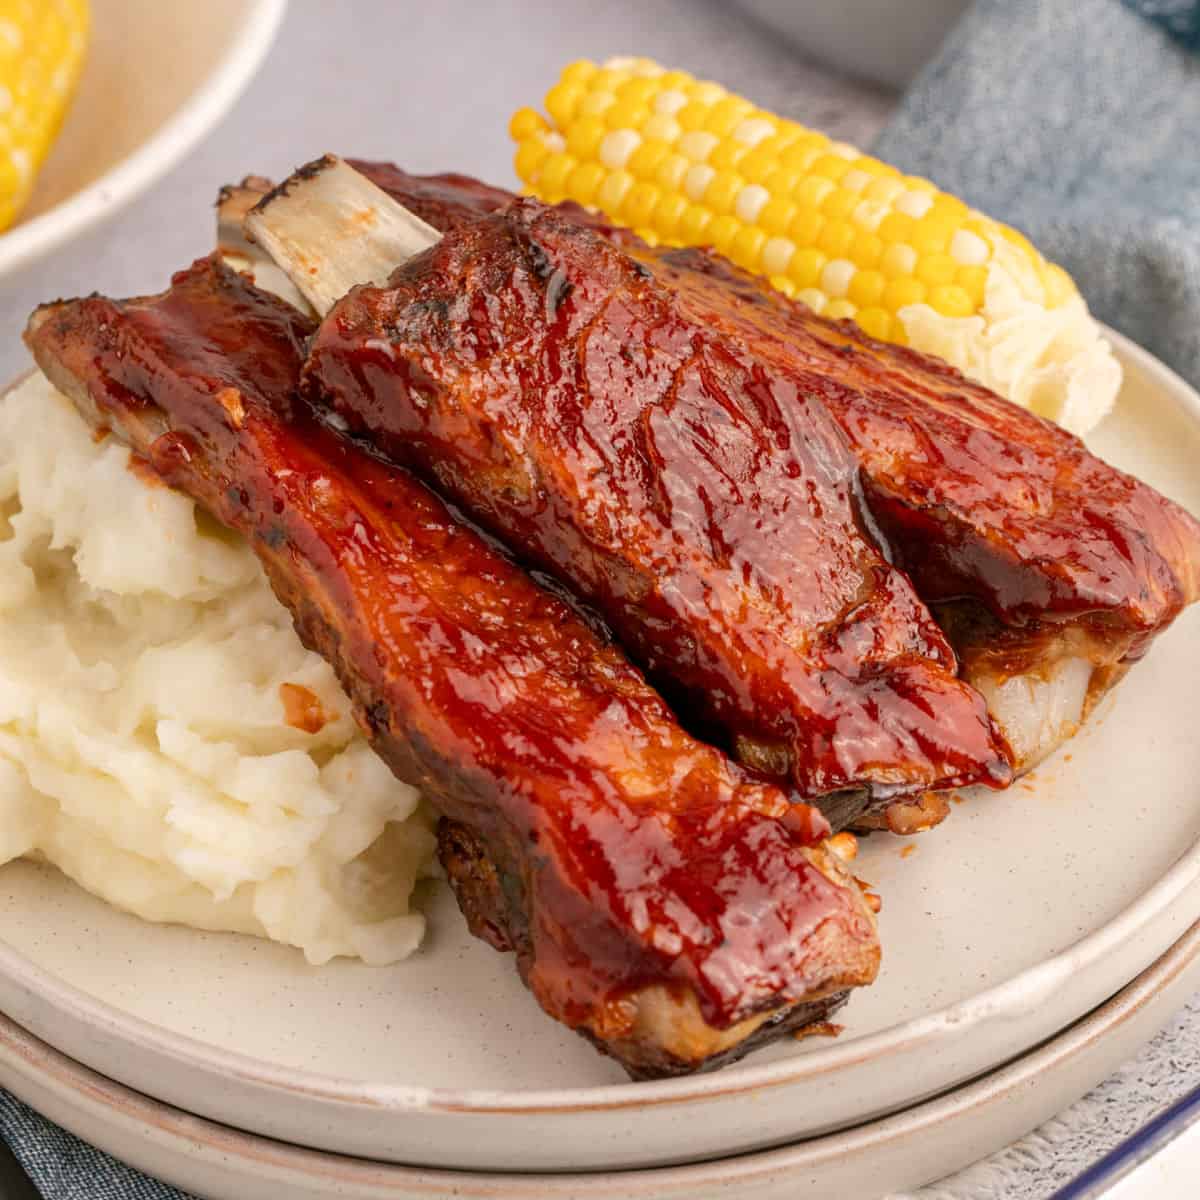 sauce image of country style pork ribs on a plate with mashed potatoes and corn on the cob